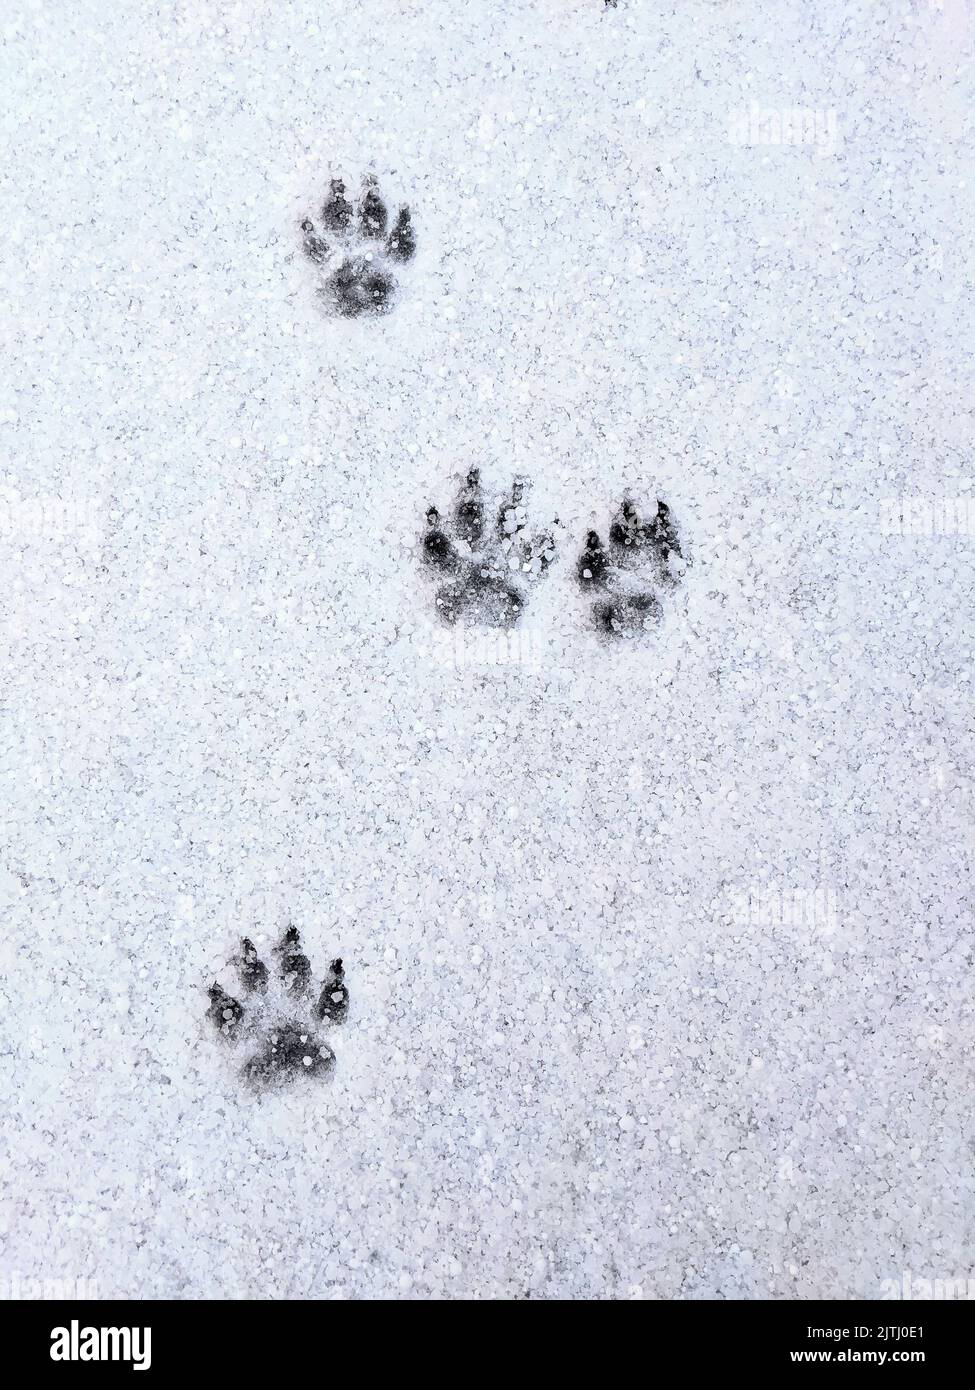 Footprints left by a dog in snow Stock Photo